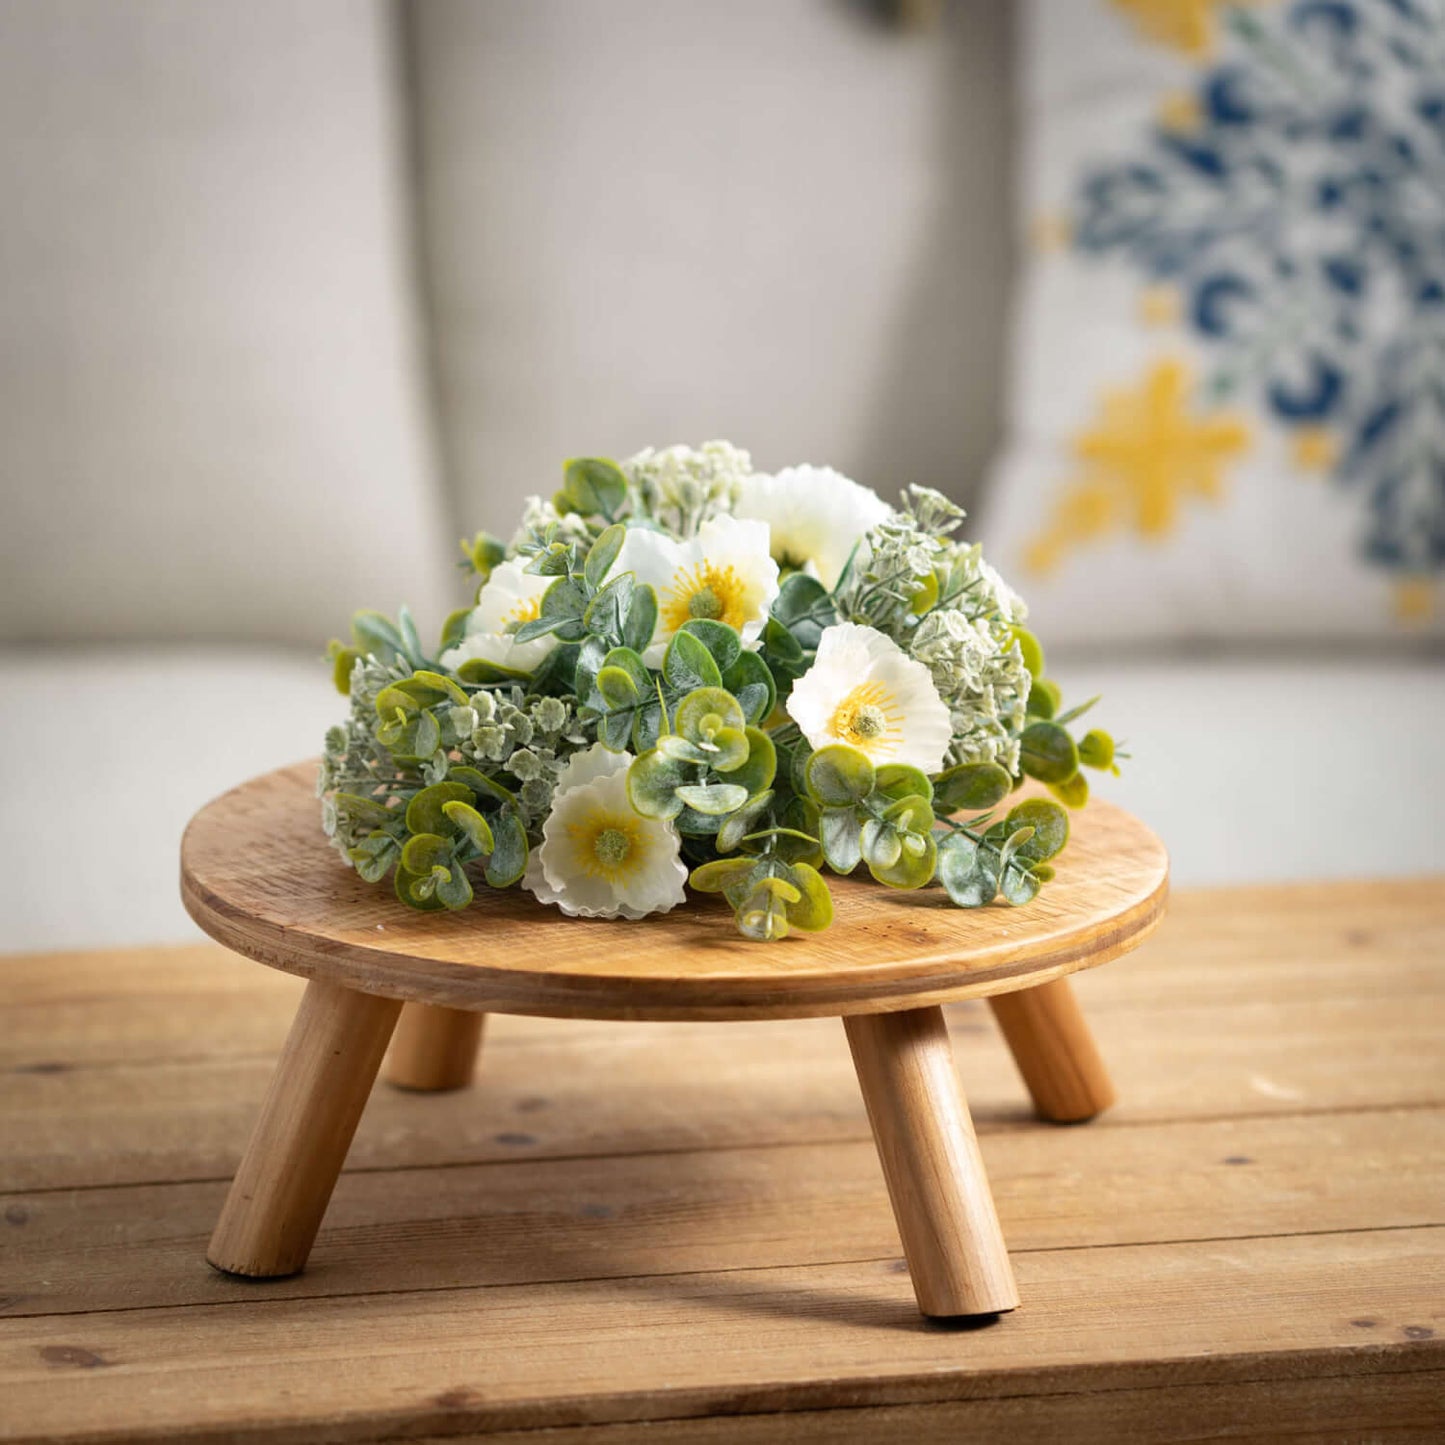 riser on wooden table with floral arrangement on it. couch and pillow in background.